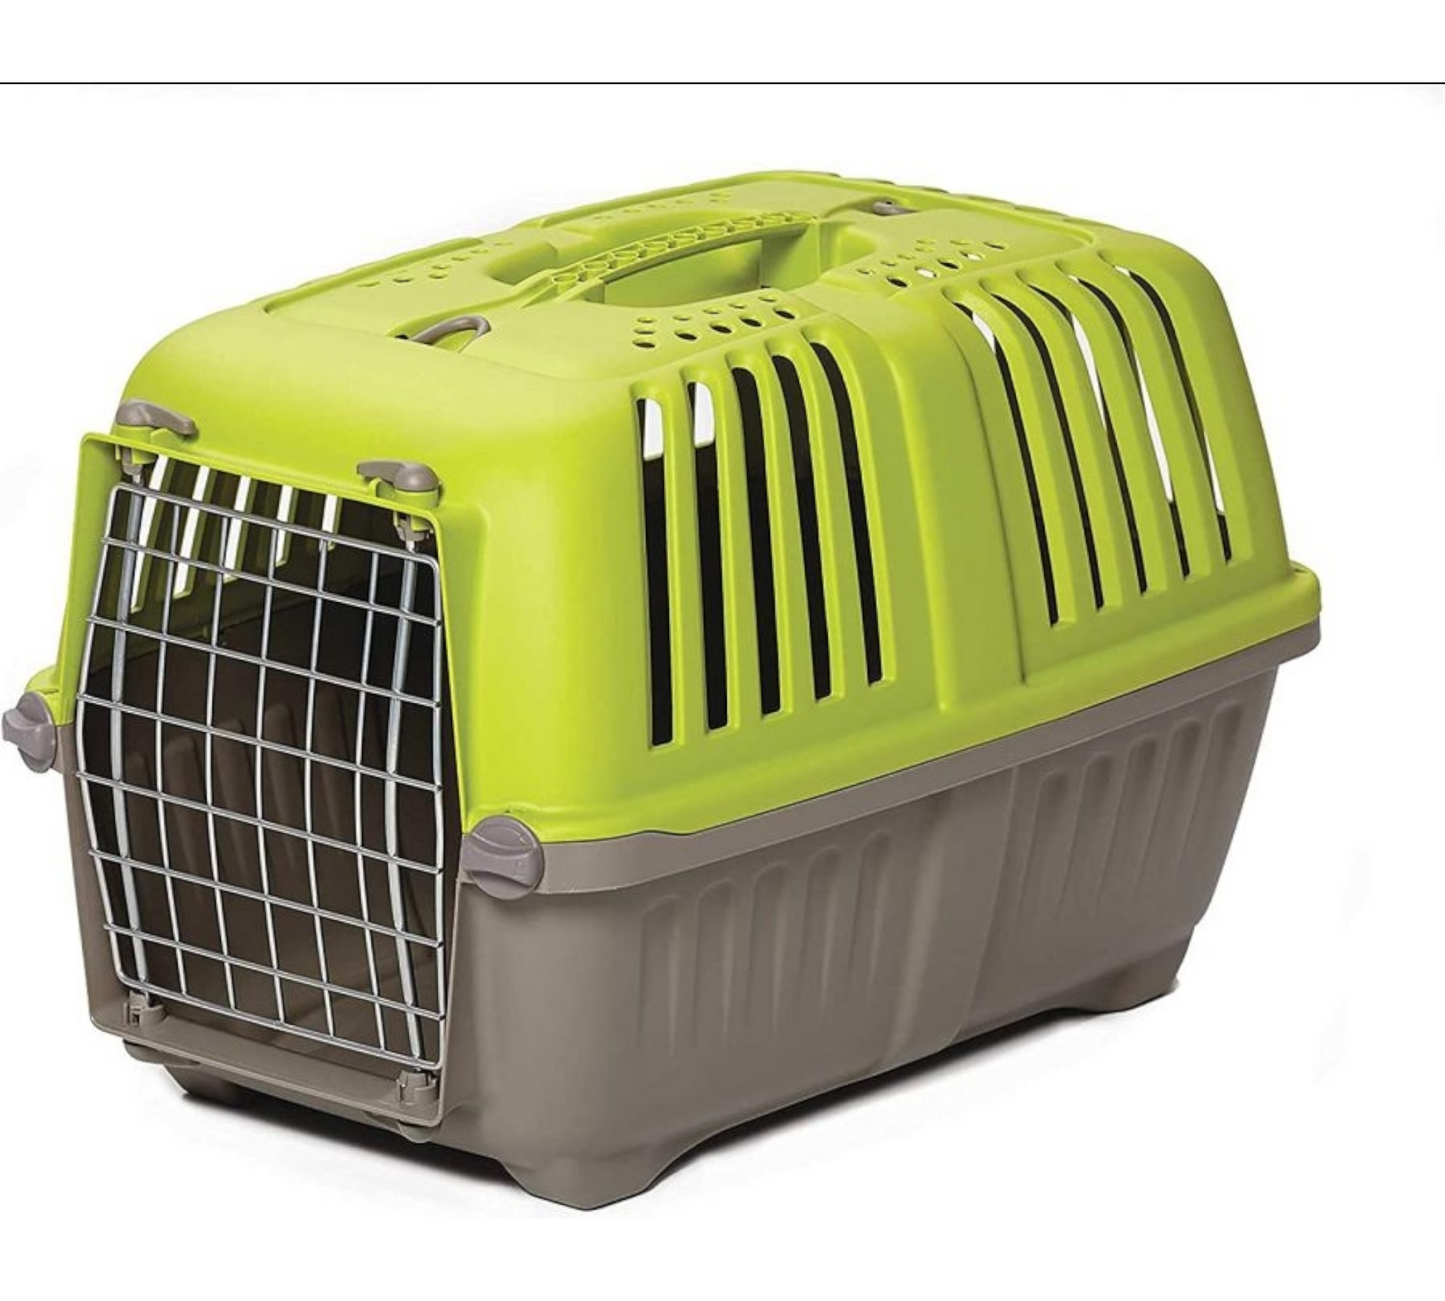 MidWest Spree Plastic Dog & Cat Kennel